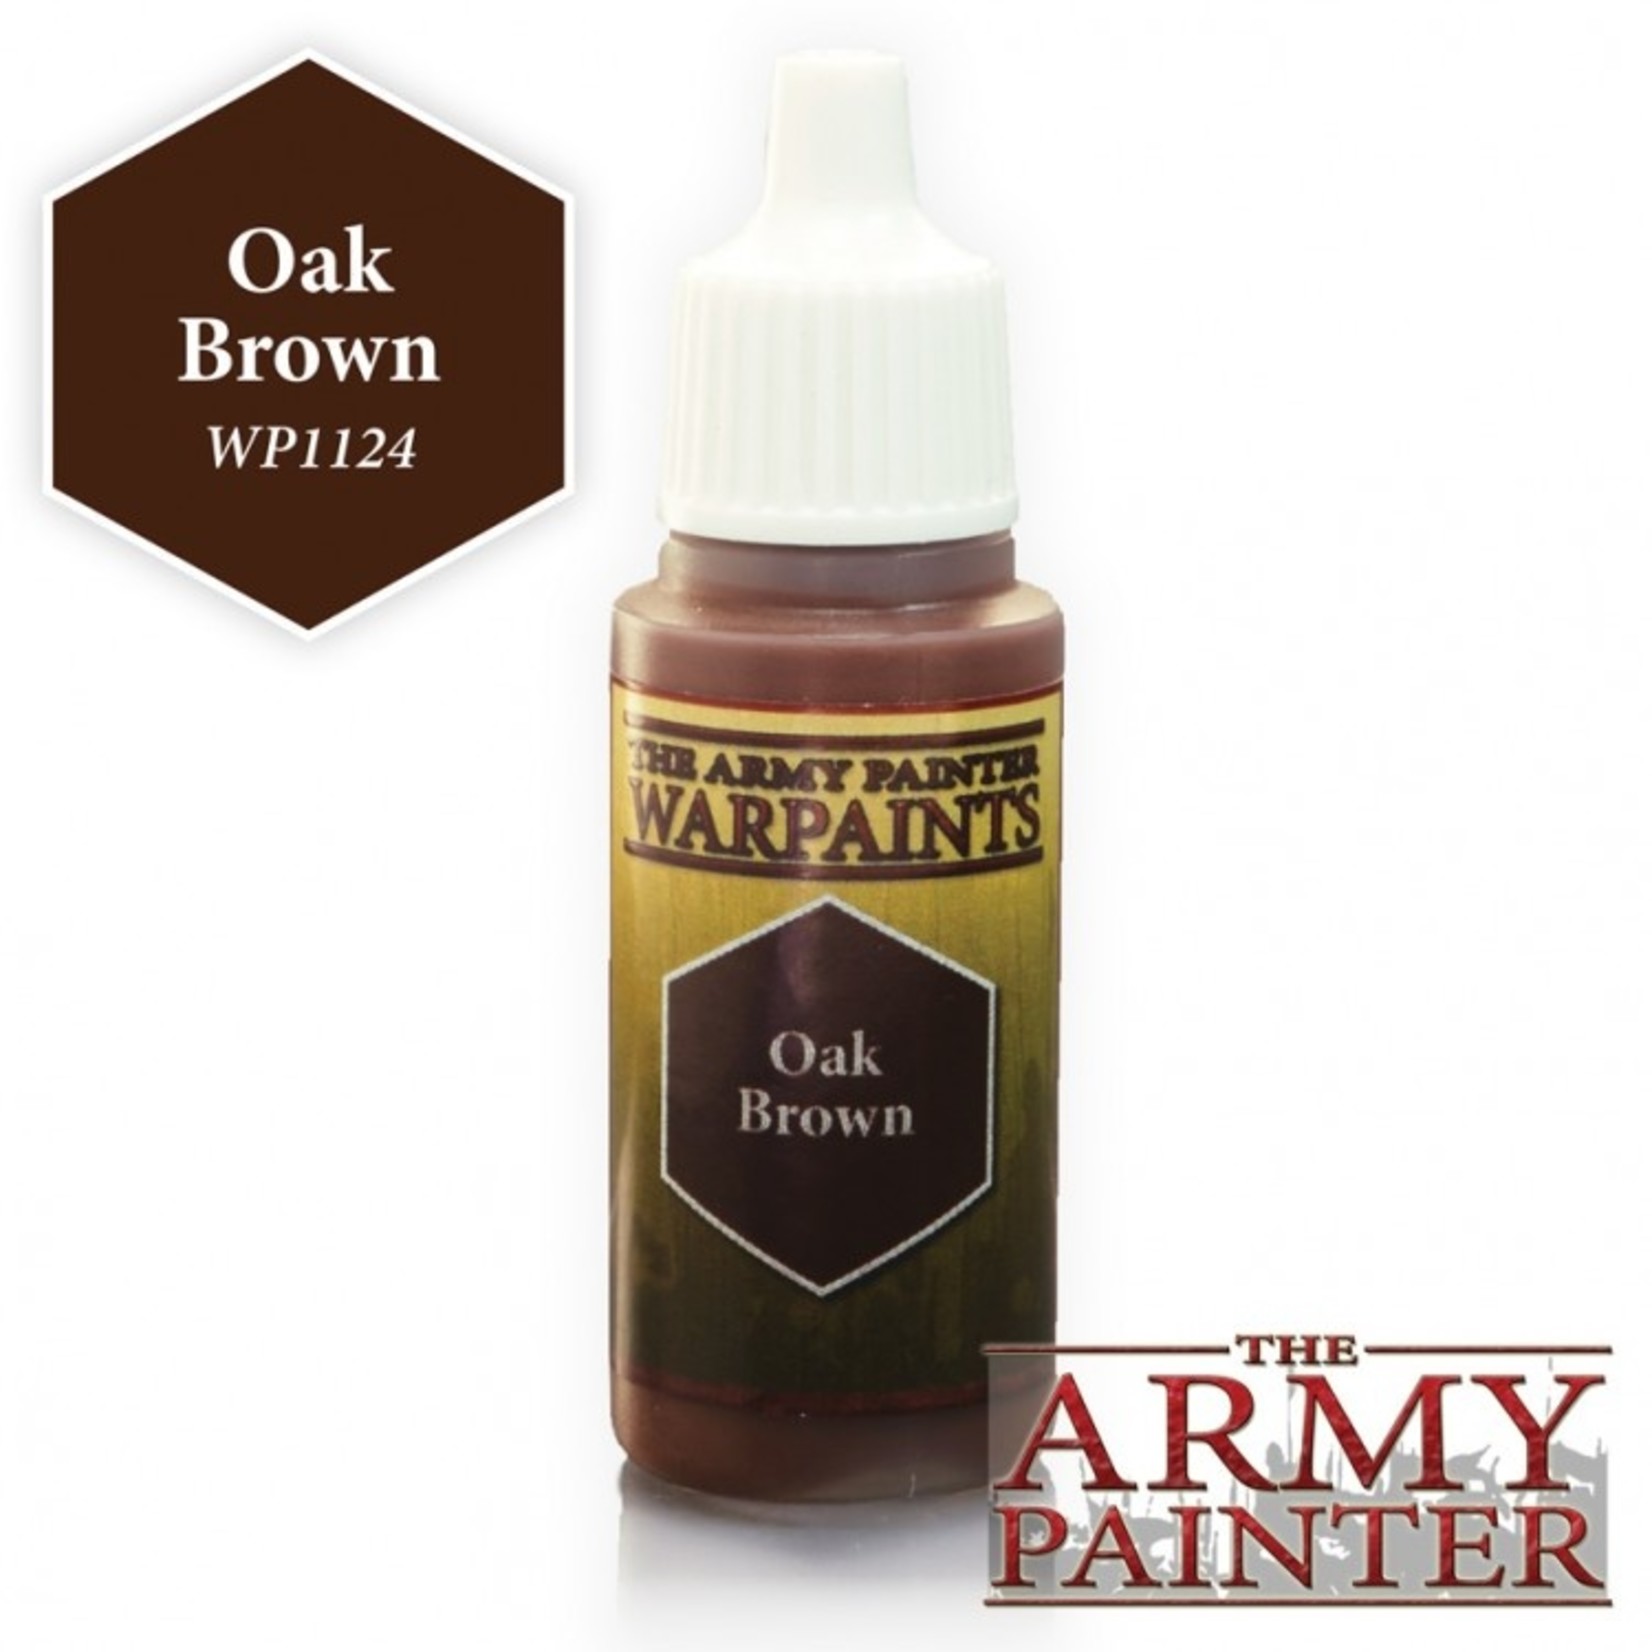 The Army Painter The Army Painter Oak Brown 18ml